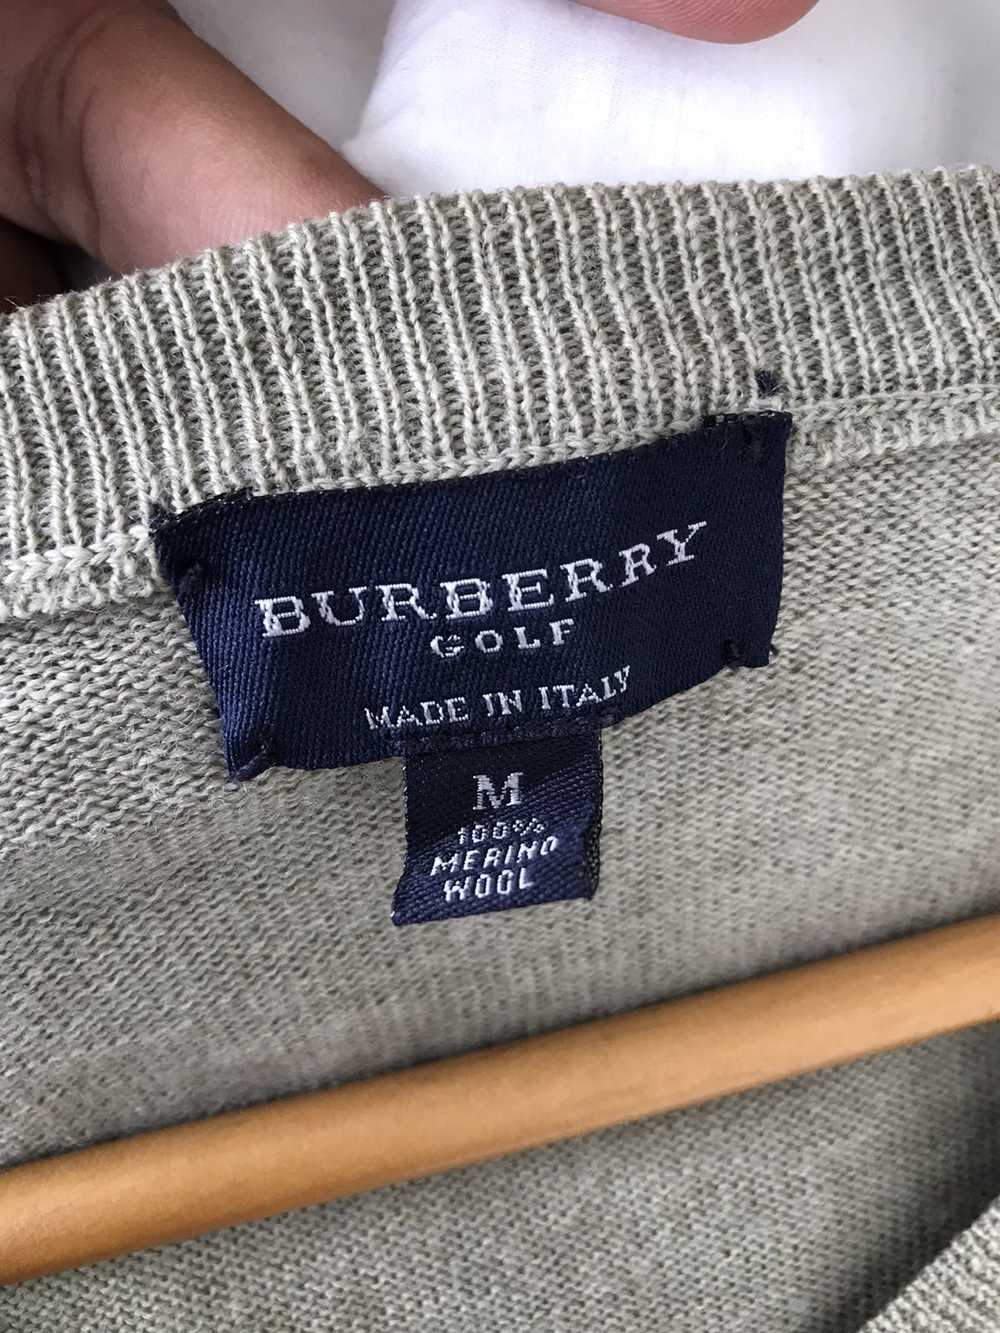 Vintage - 90s Burberry Golf wool Knit - image 10